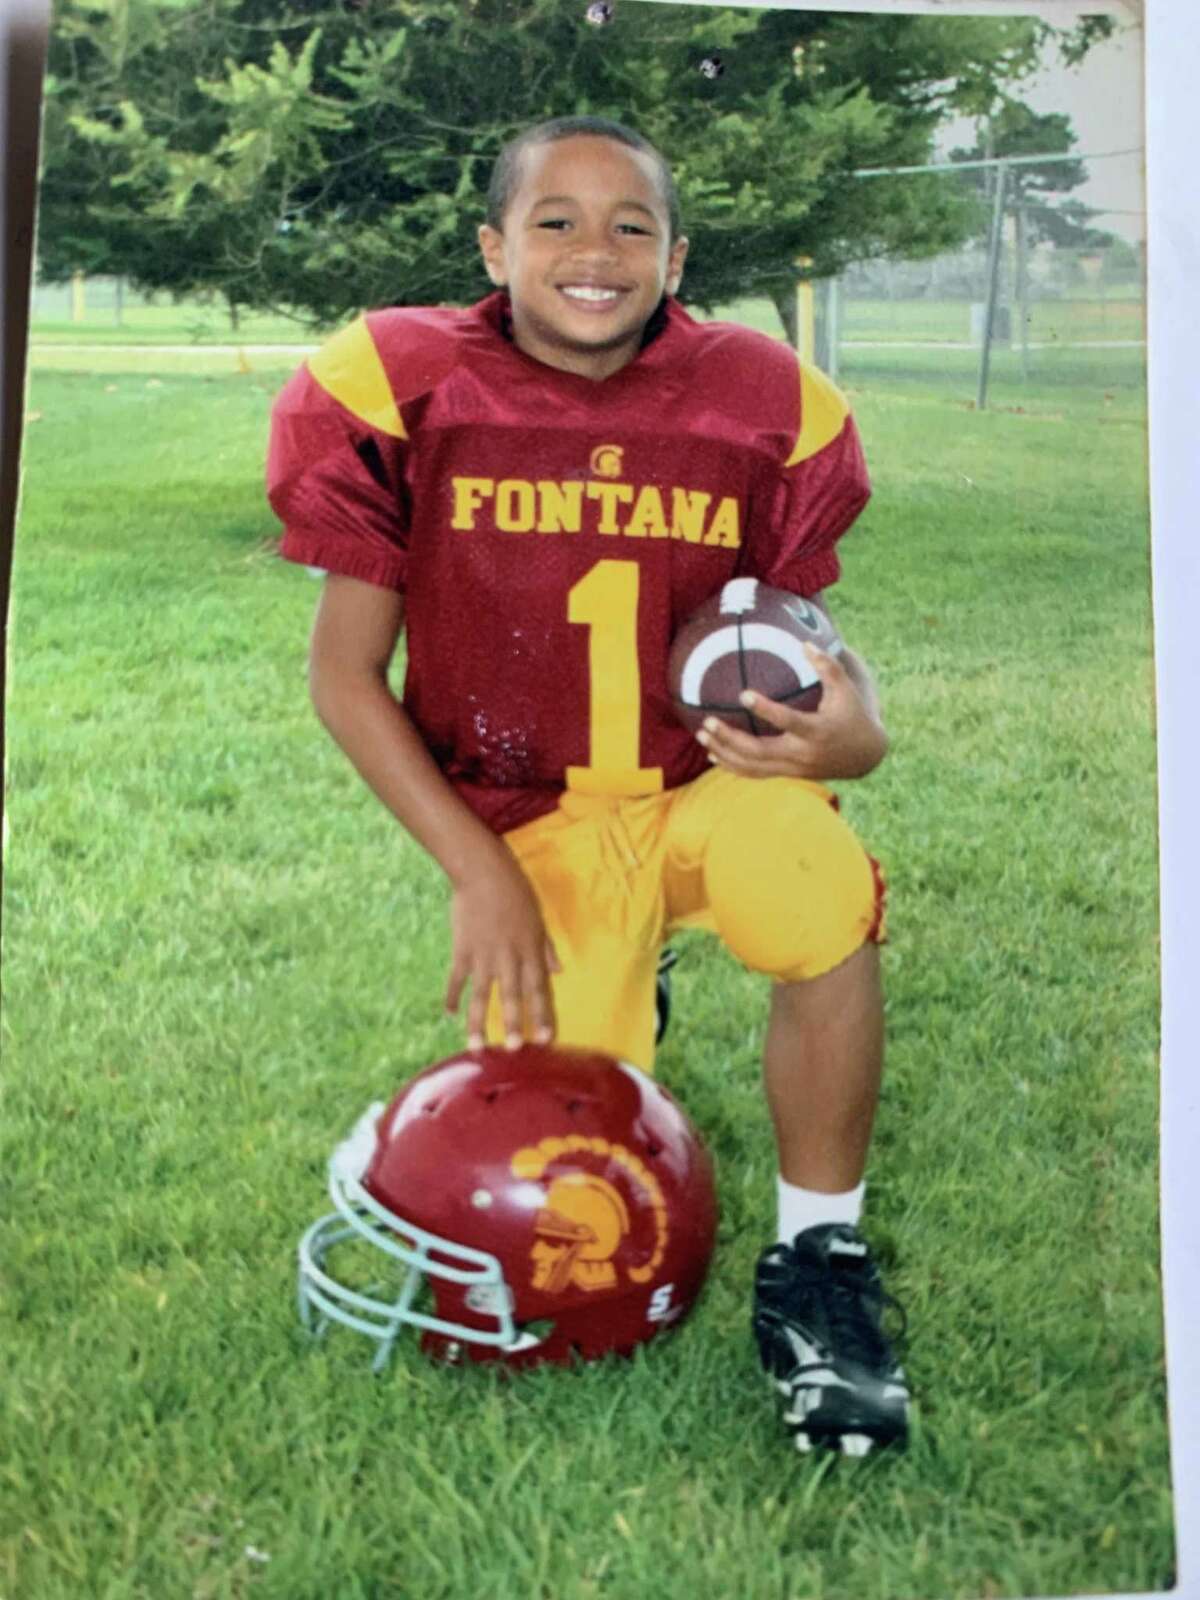 Jaydn Ott played running back throughout his youth in Chino (San Bernardino County). This photo shows him at age 8 or 9.